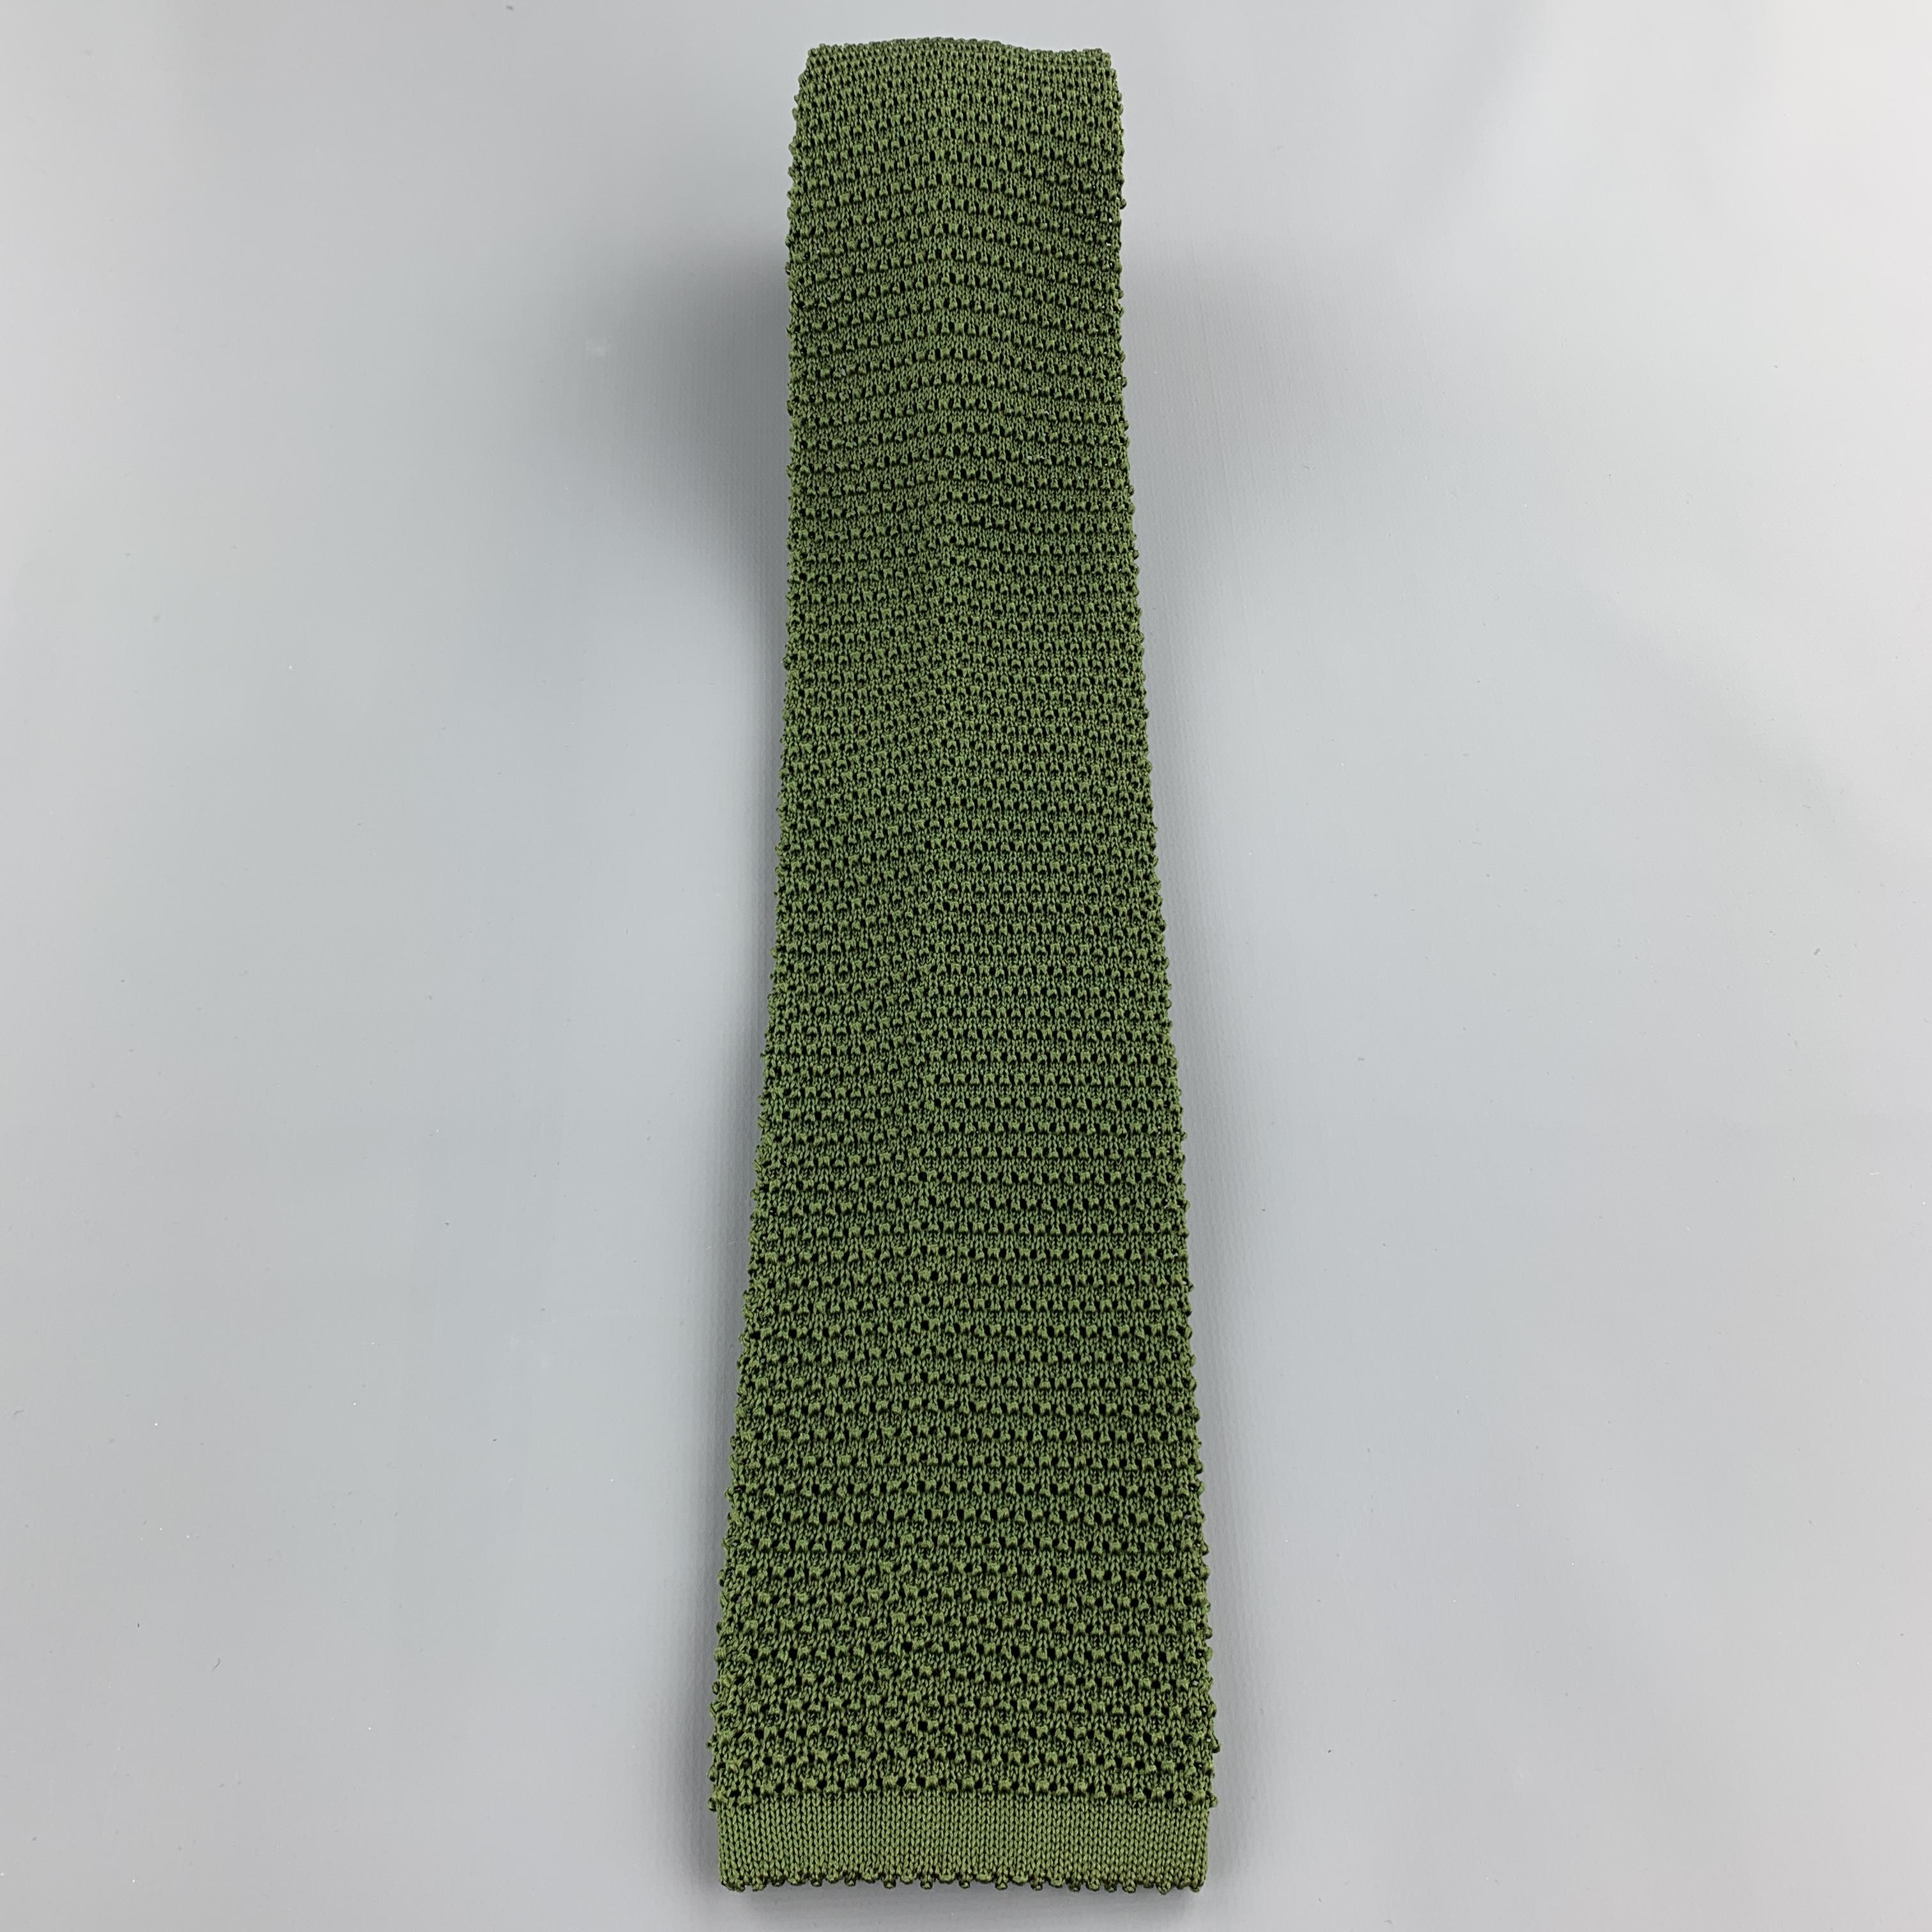 turnbull and asser ties